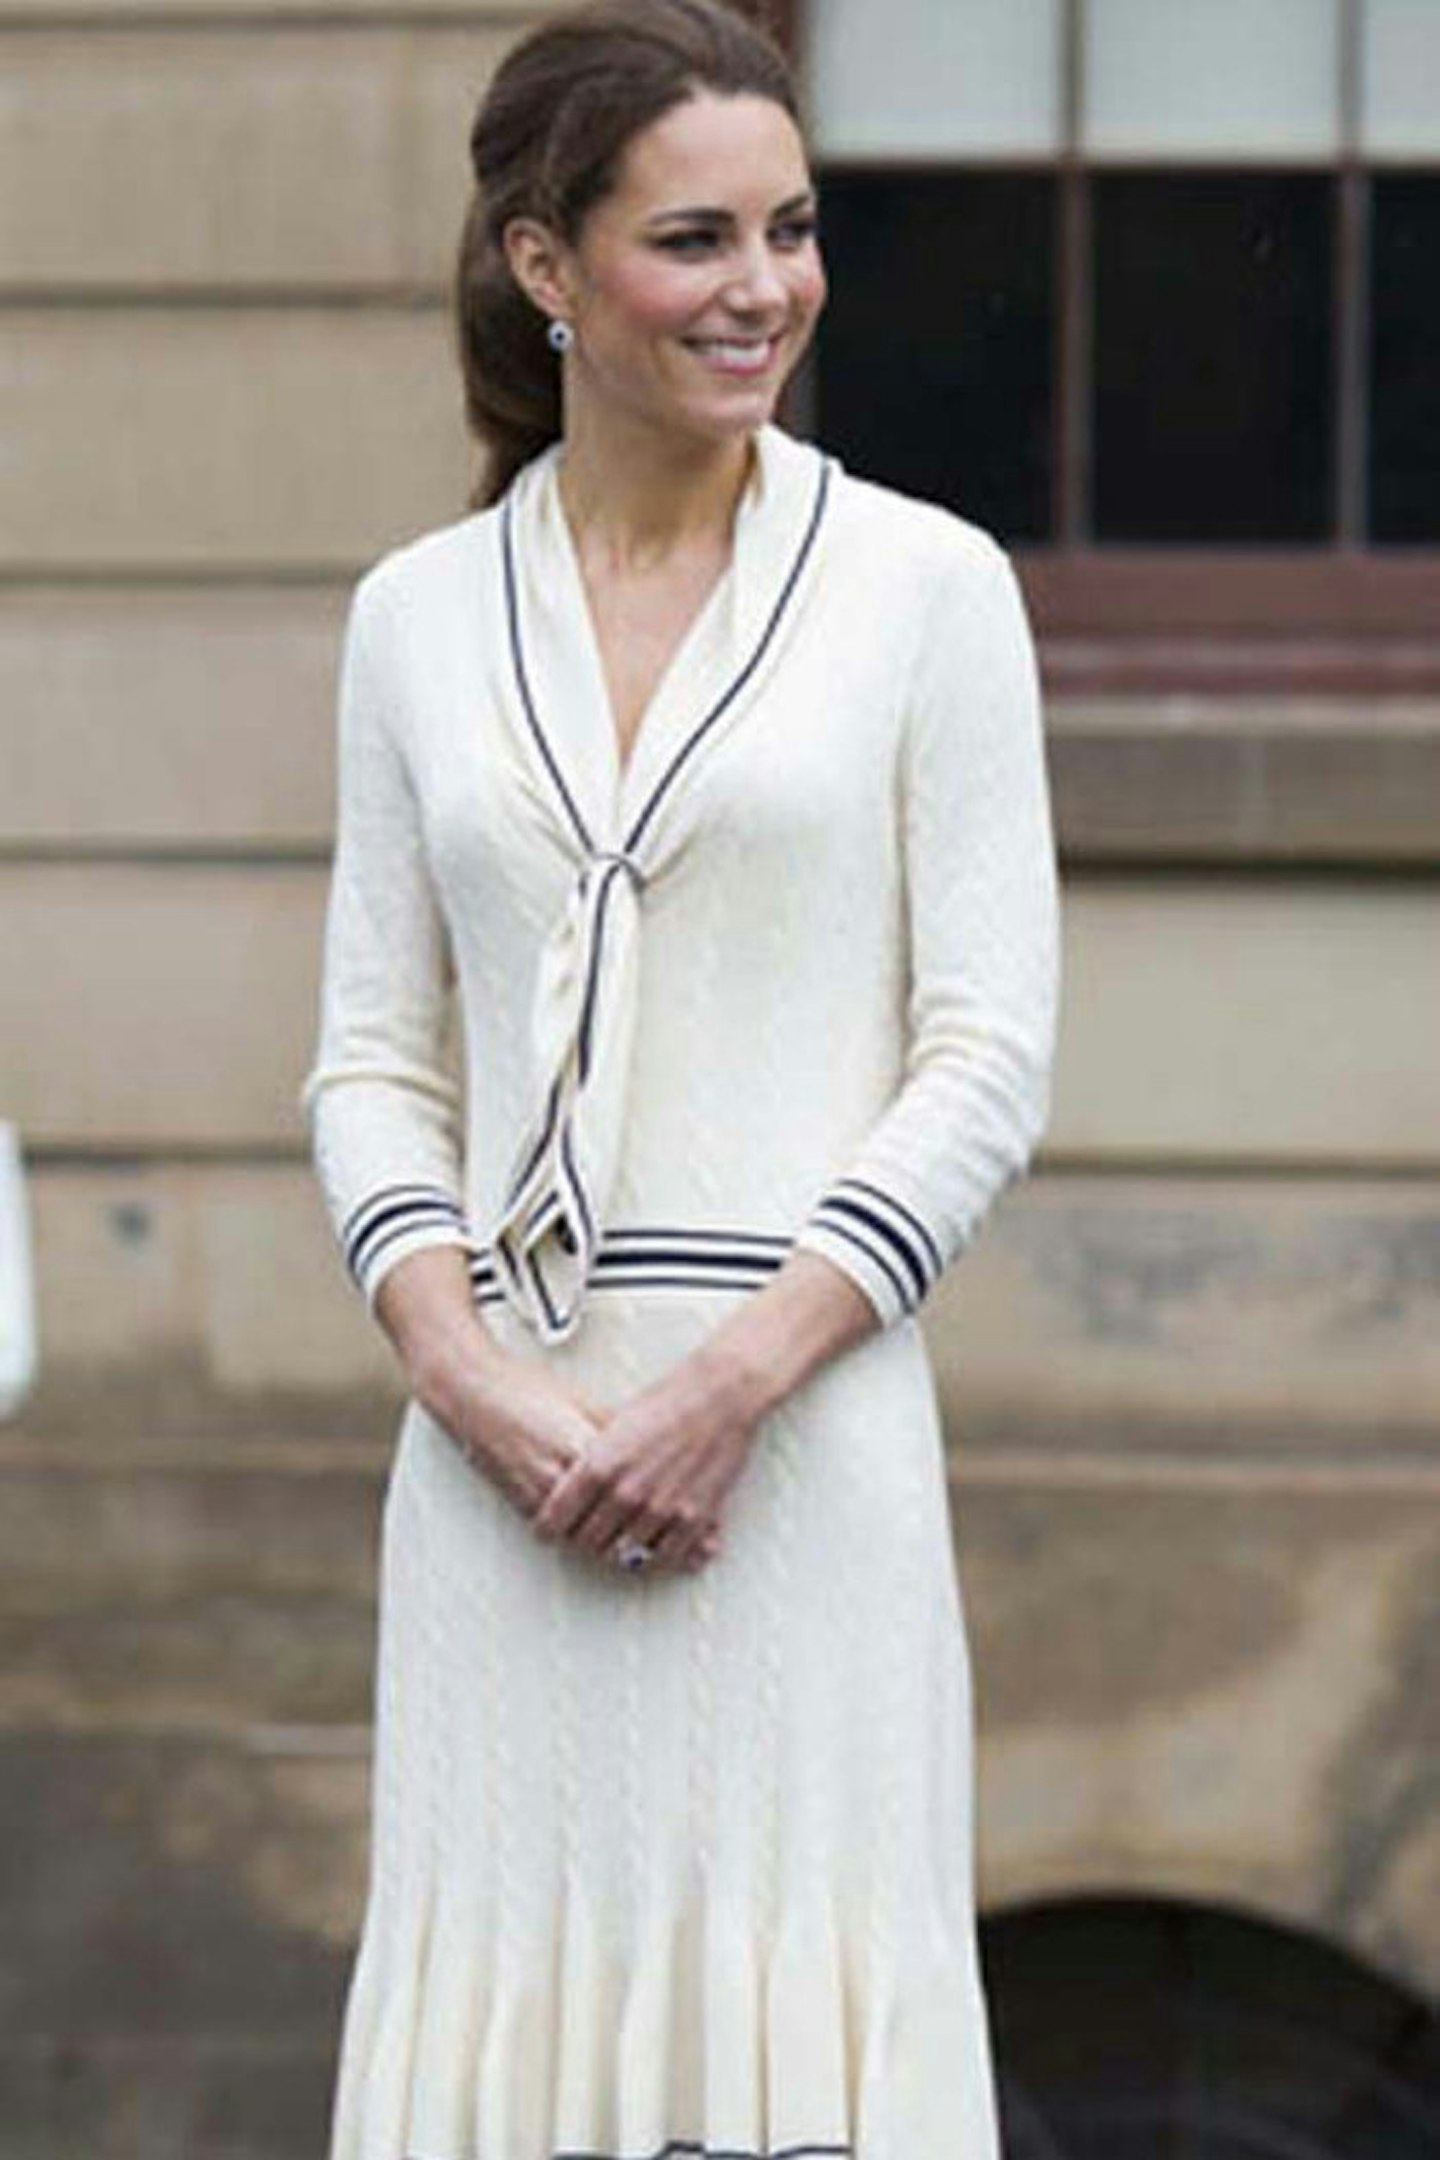 Kate Middleton at Province House in Charlottetown, Prince Edward Island, July 2011